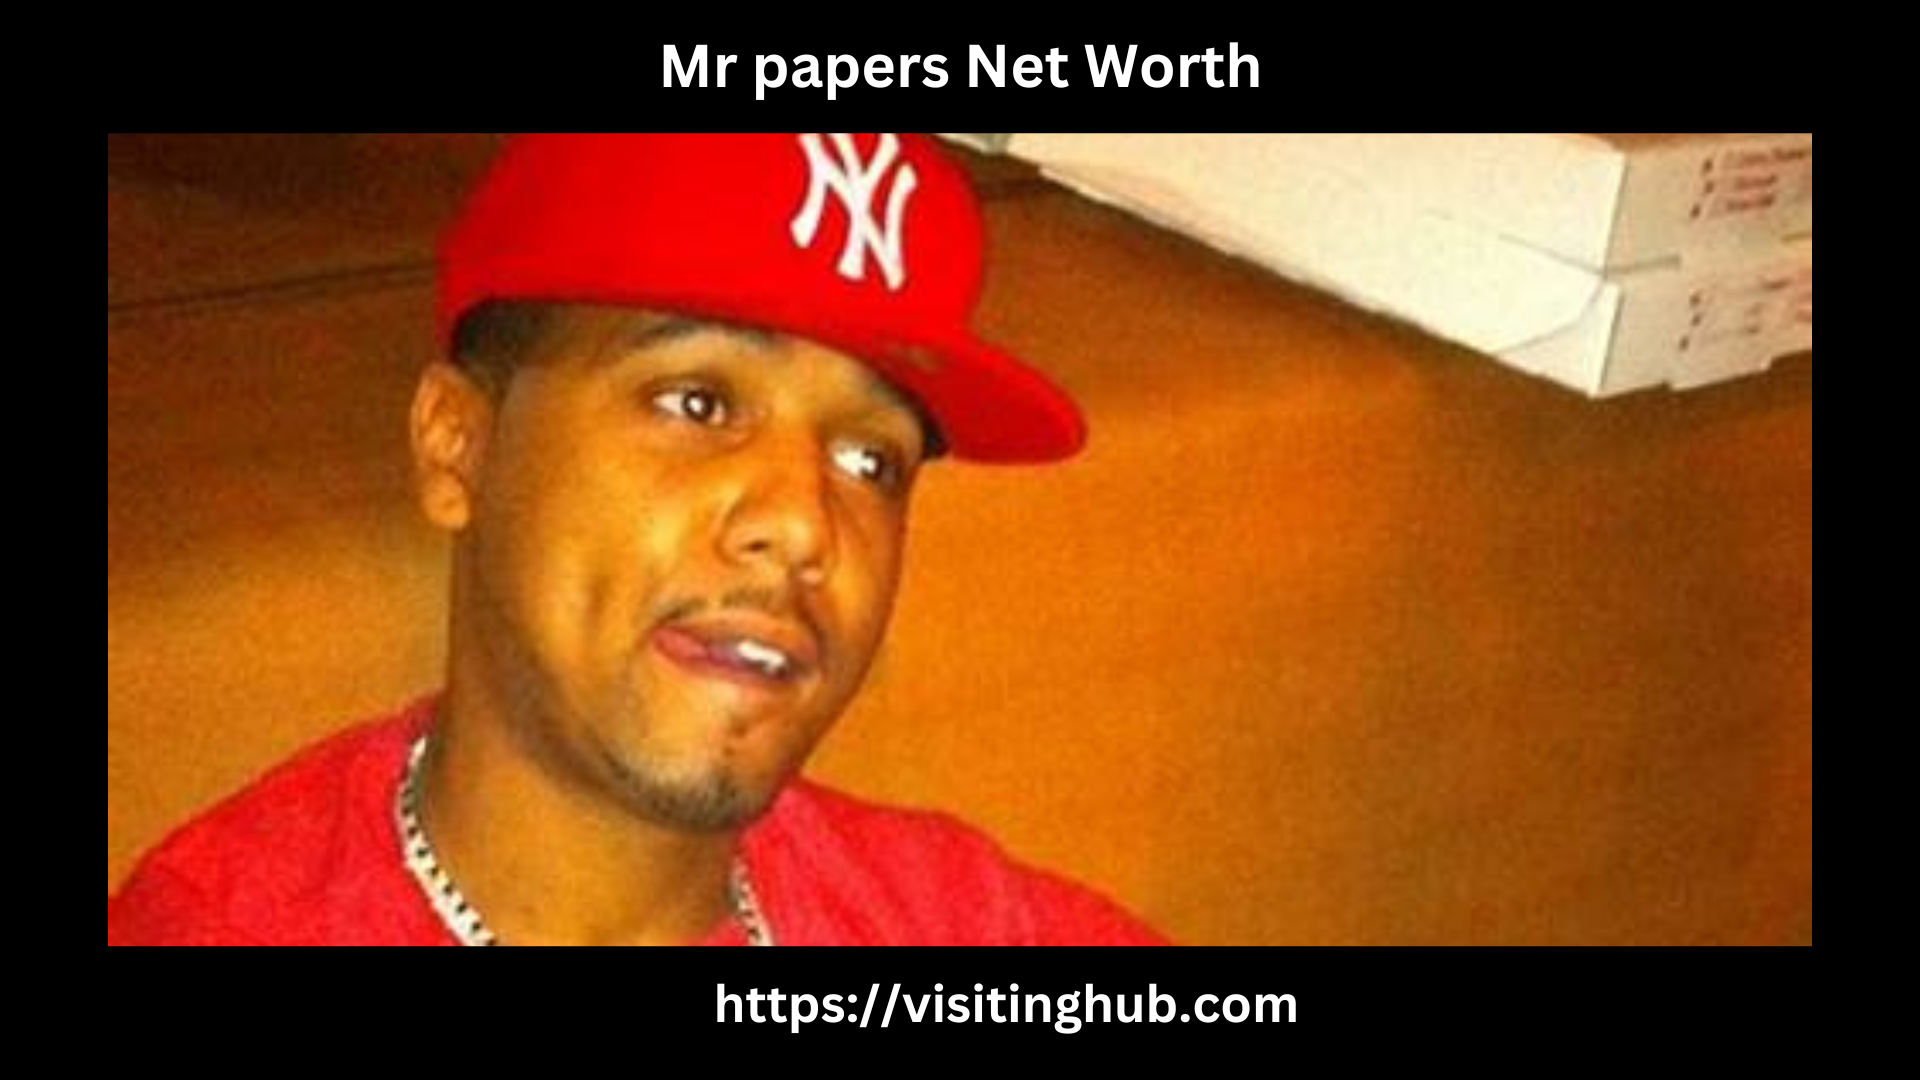 Mr papers Net Worth